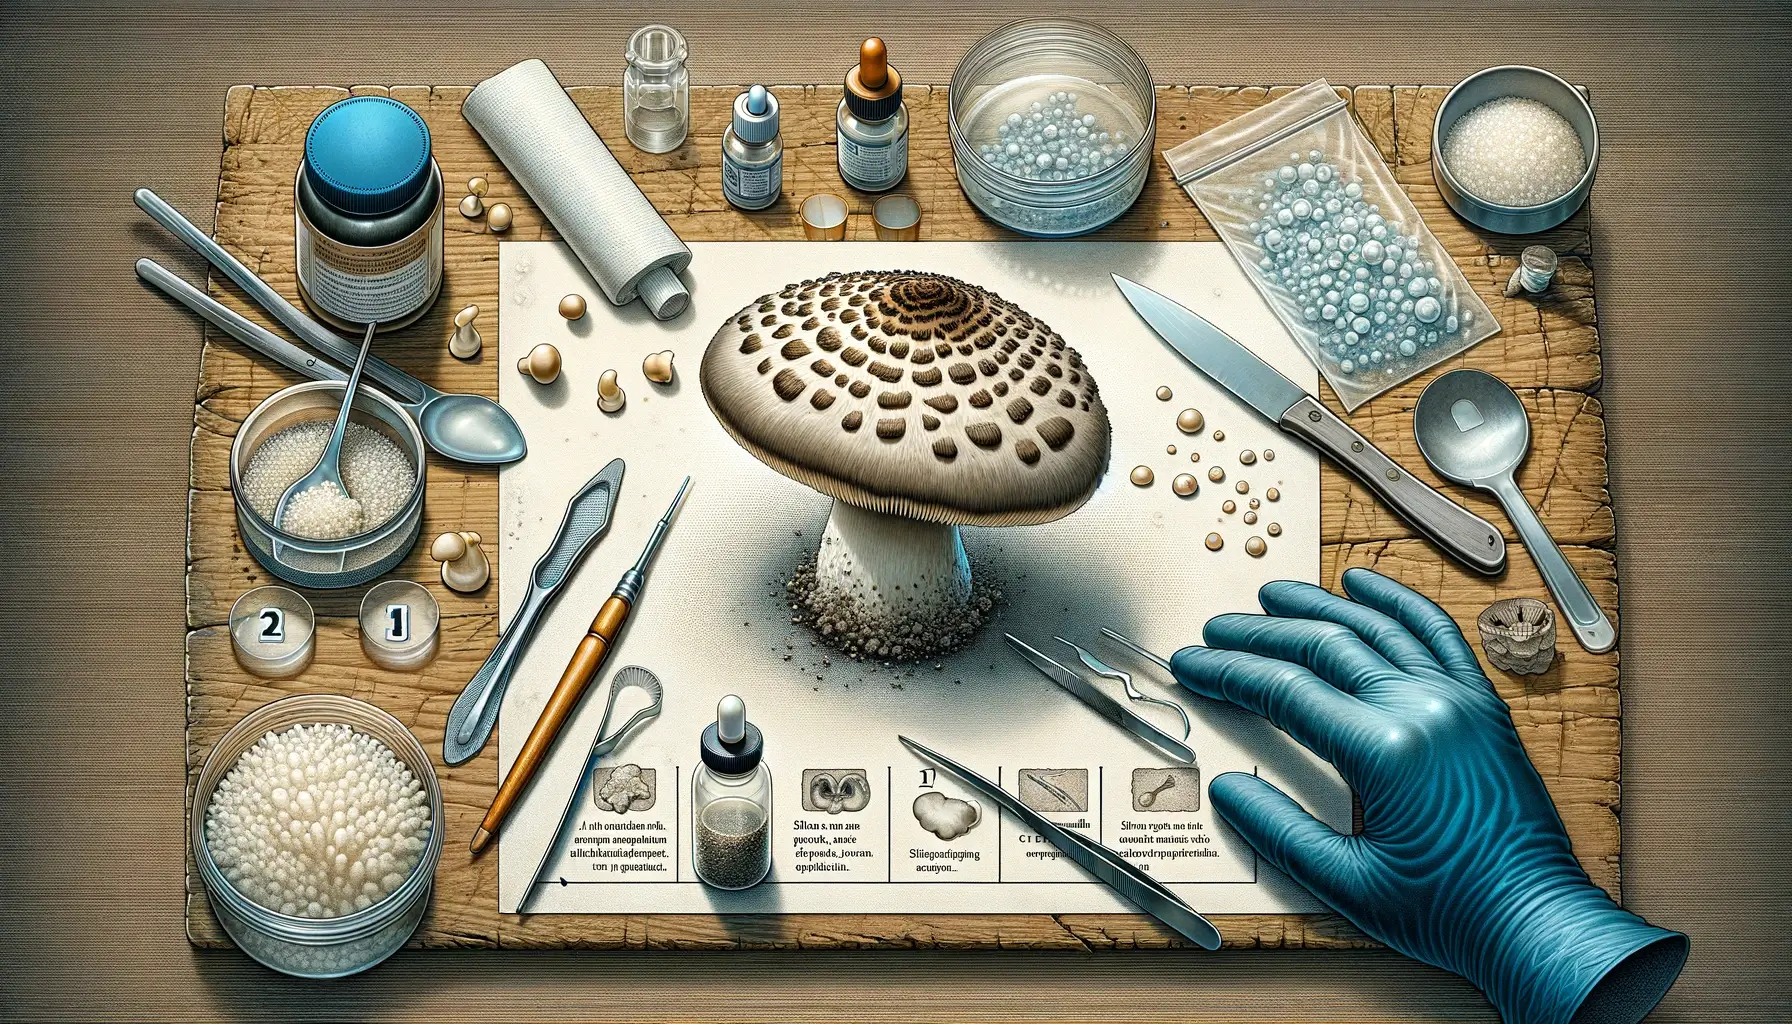 Illustration of mushroom spore collection process with labeled equipment on a workspace.